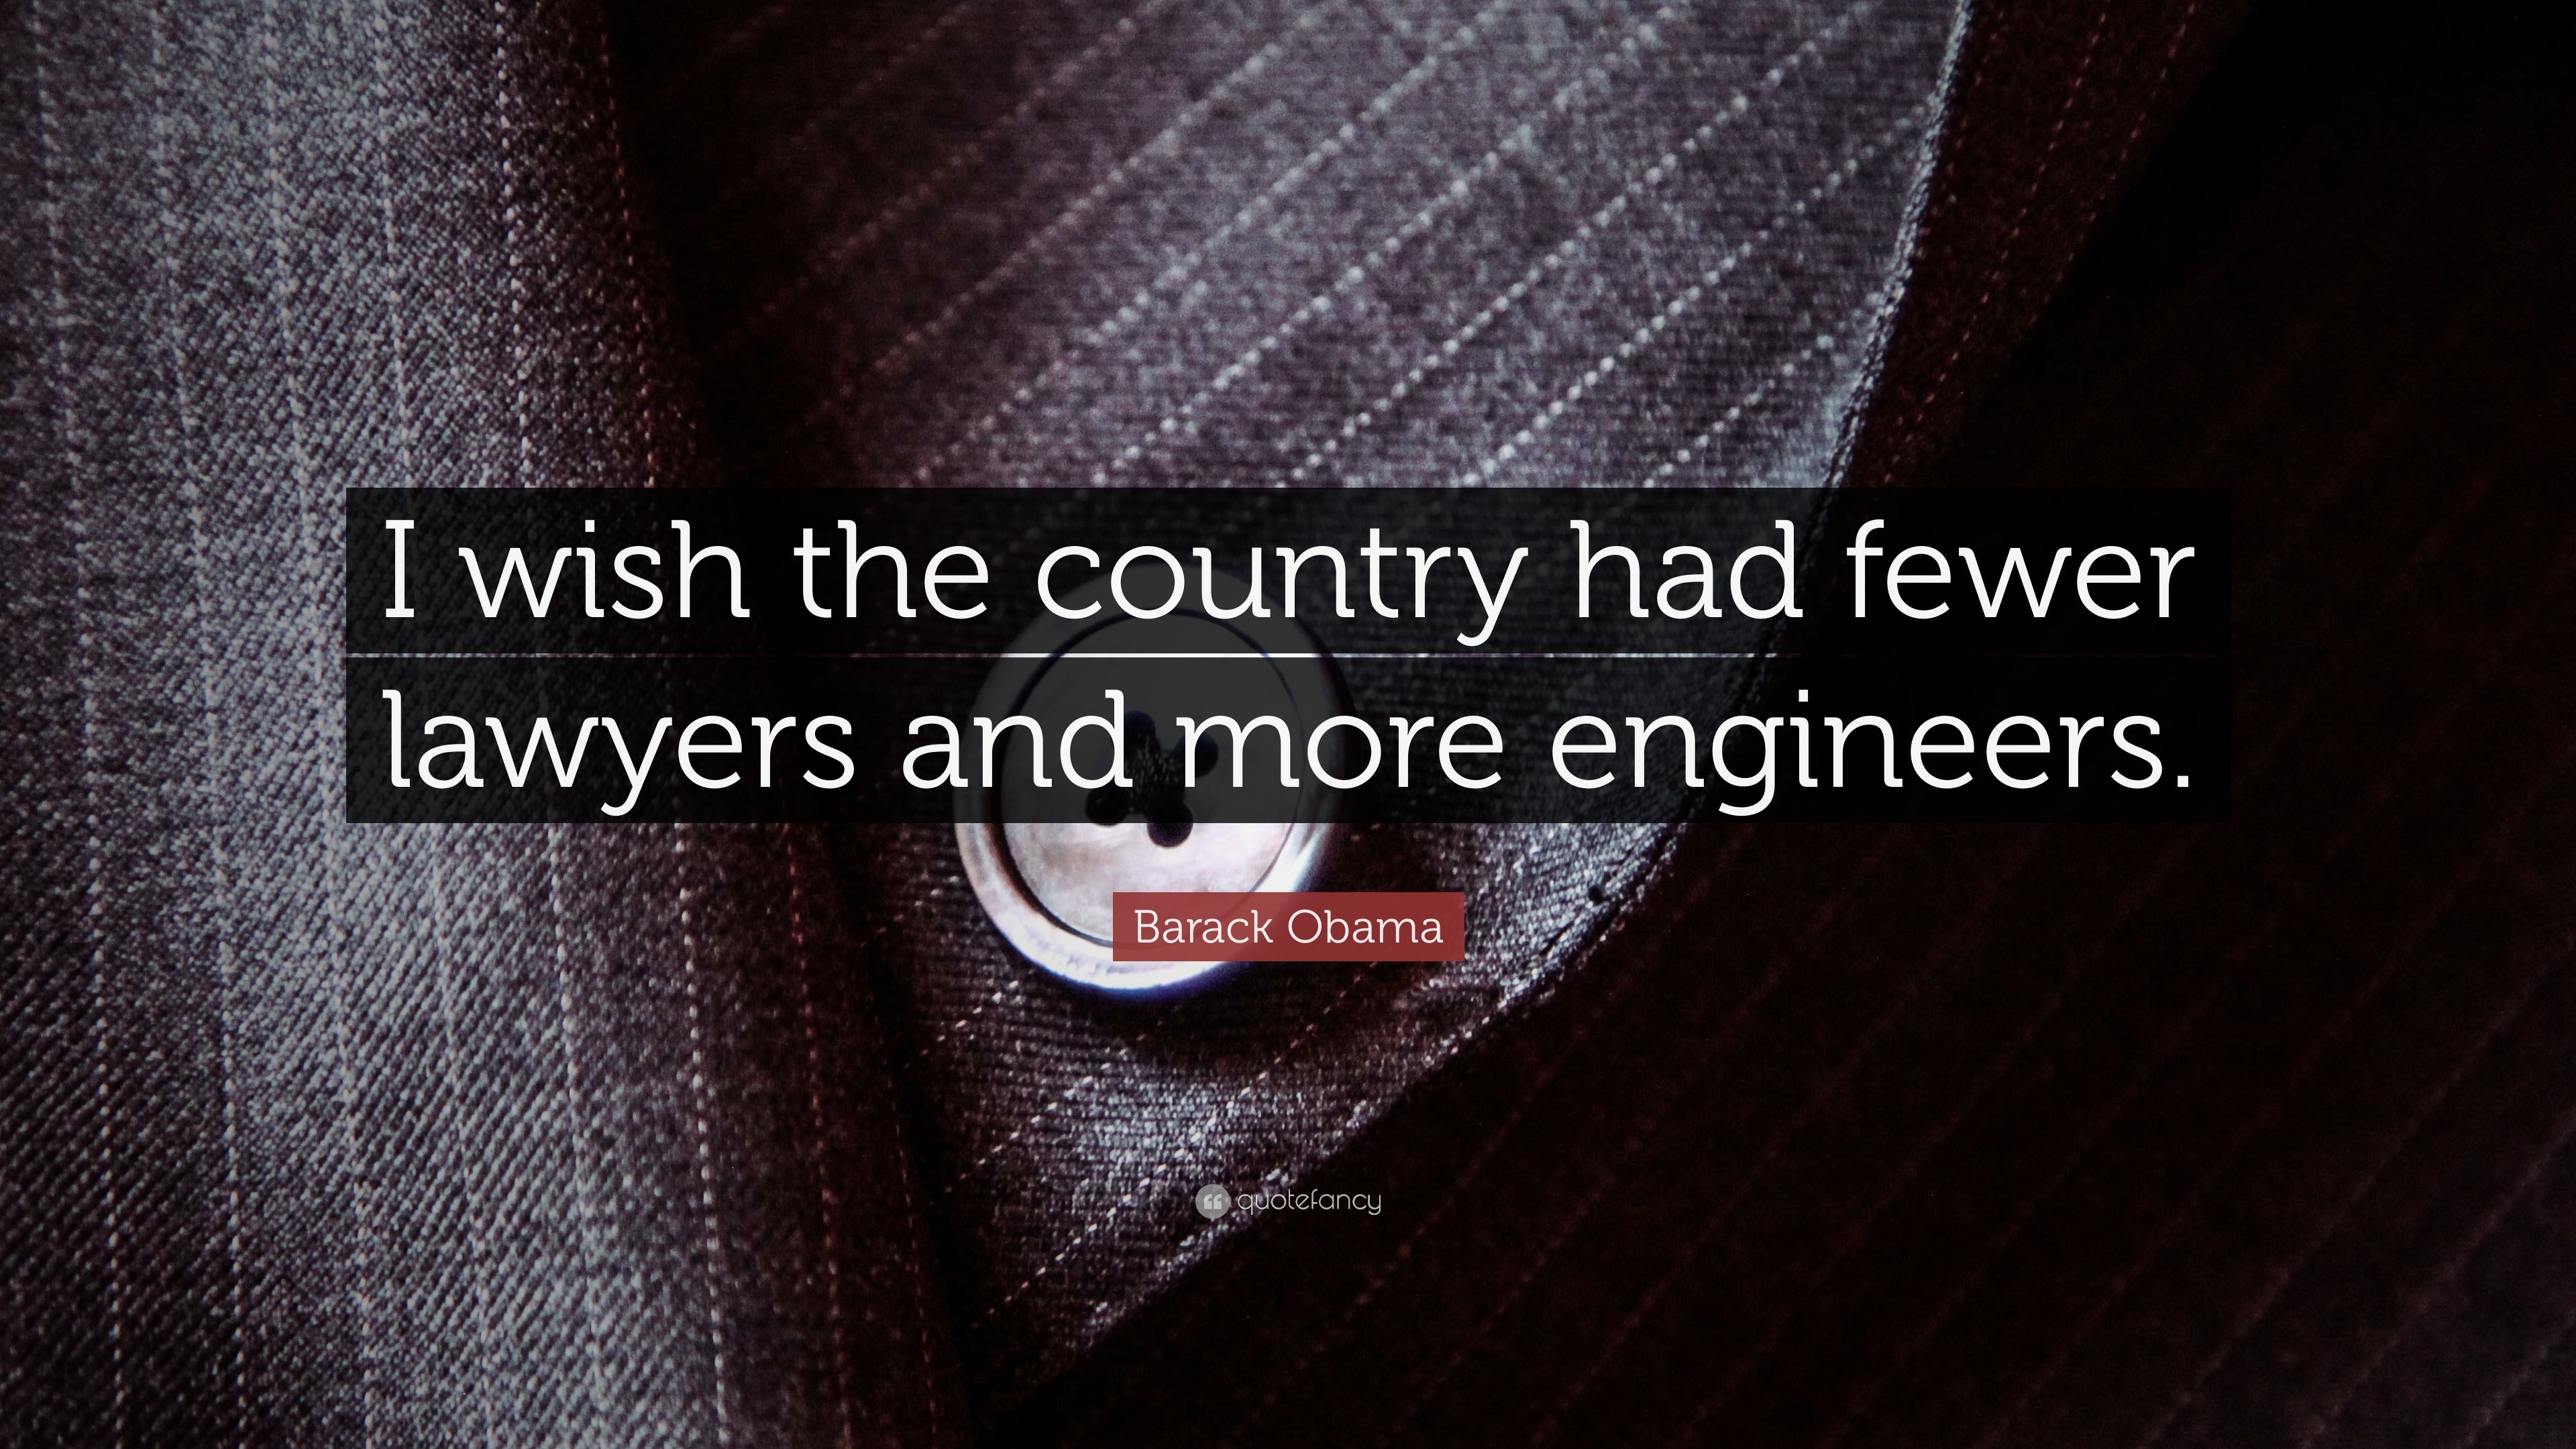 Barack Obama Quote: “I wish the country had fewer lawyers and more engineers.” (14 wallpaper)